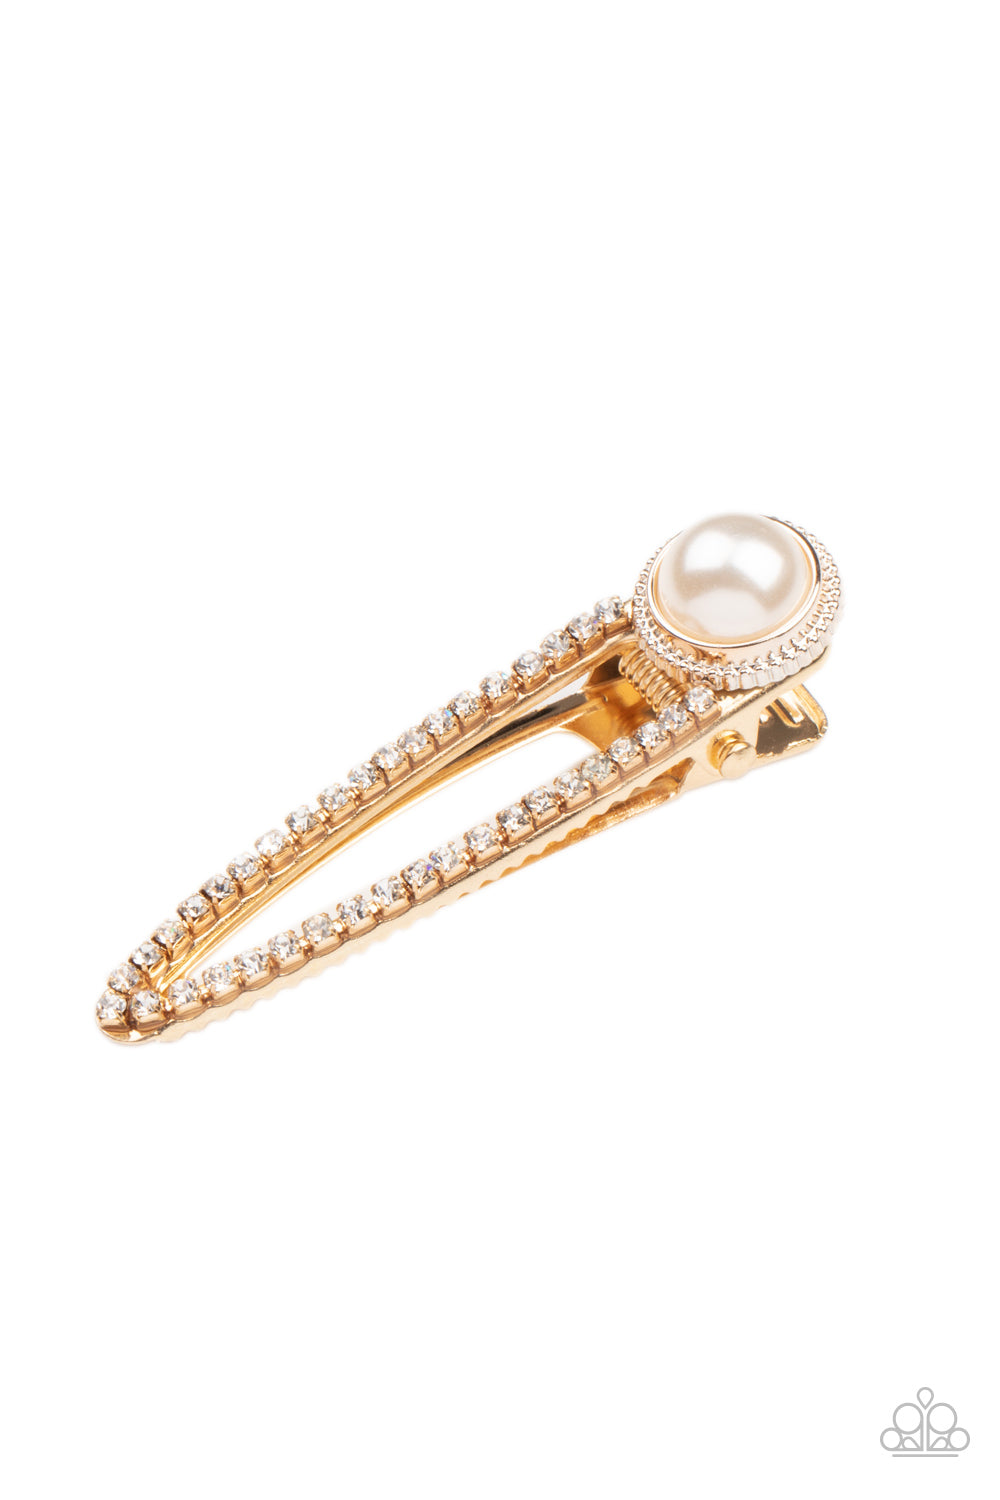 Paparazzi Accessories - Expert in Elegance #HB34 - Gold Hair Clip